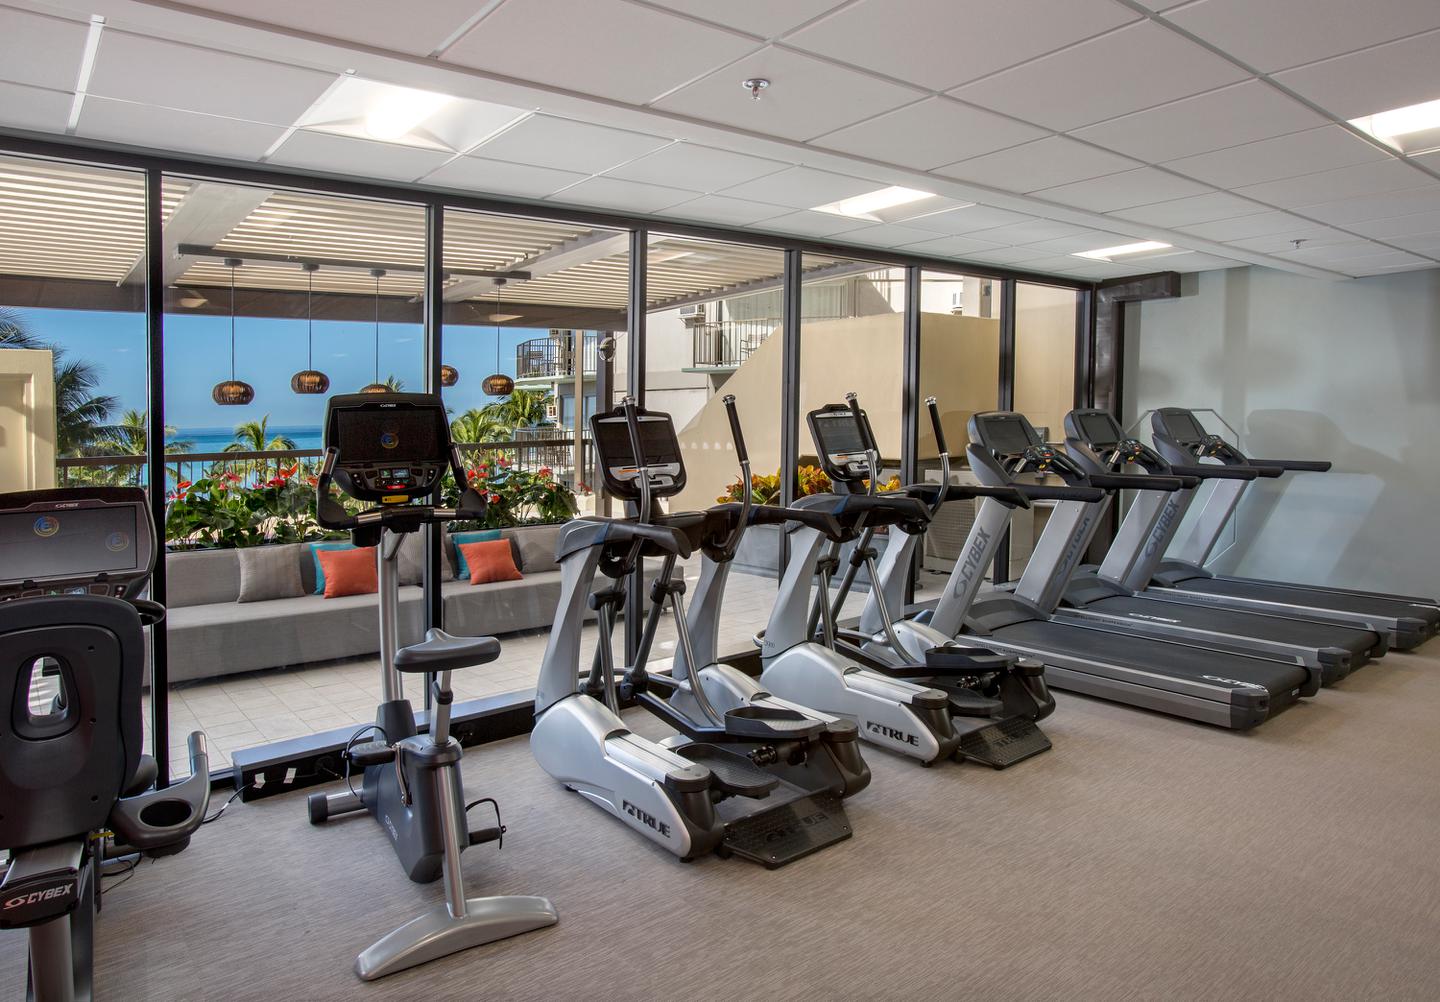 Treadmills and Other Exercise Equipment